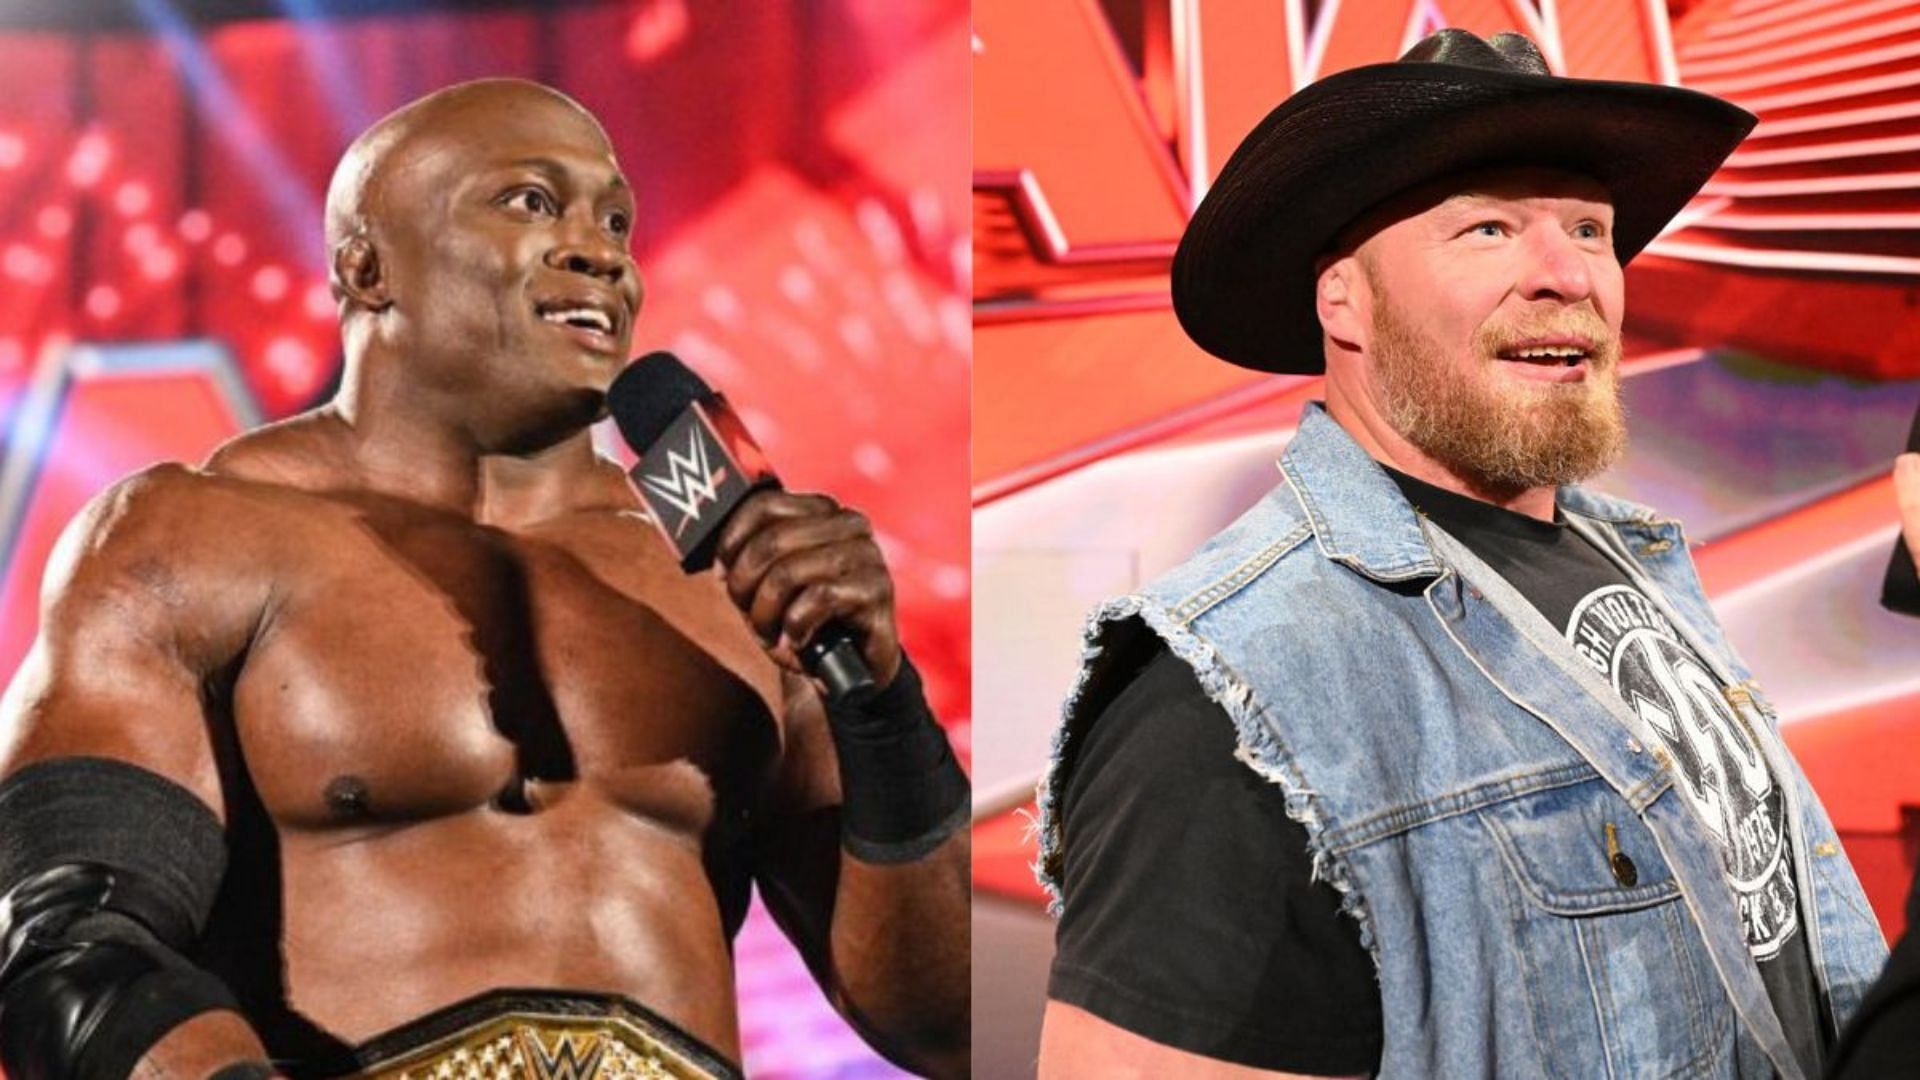 Brock Lesnar and Bobby Lashley will battle at WWE Crown Jewel